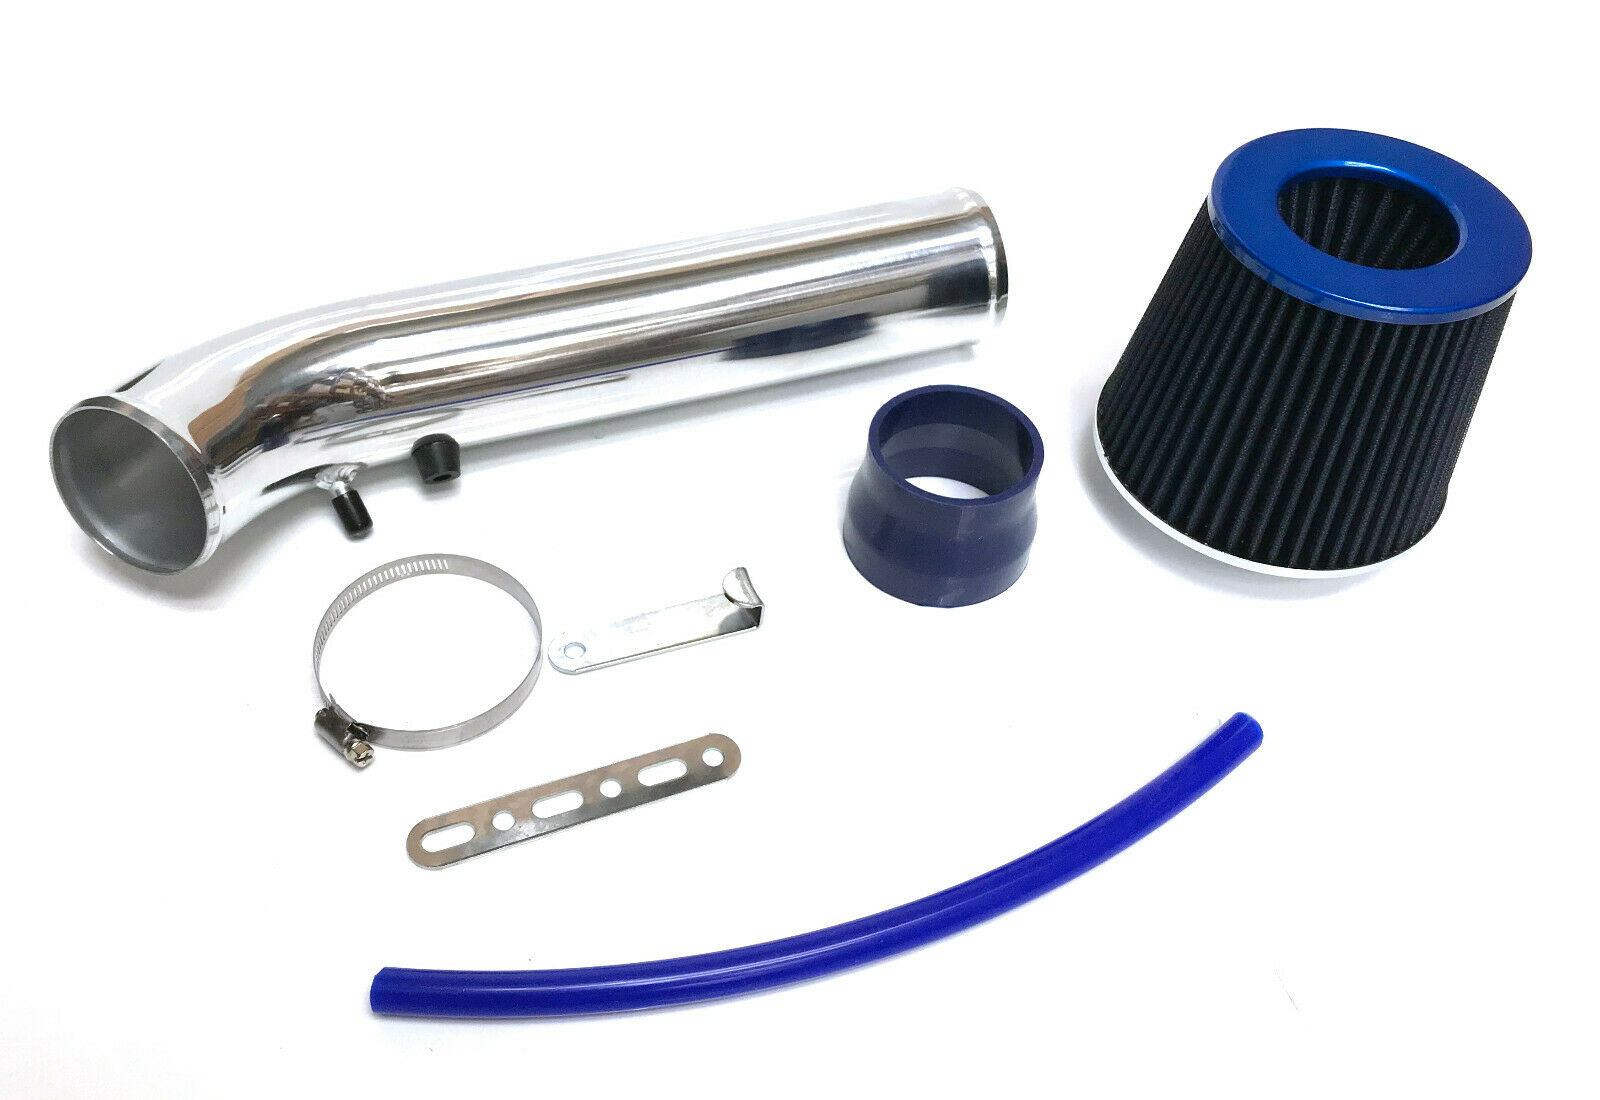 M2-HC9643 / HONDA CIVIC D15 D16 MULTI POINT INDUCTION KIT INTAKE COLD AIR FILTER